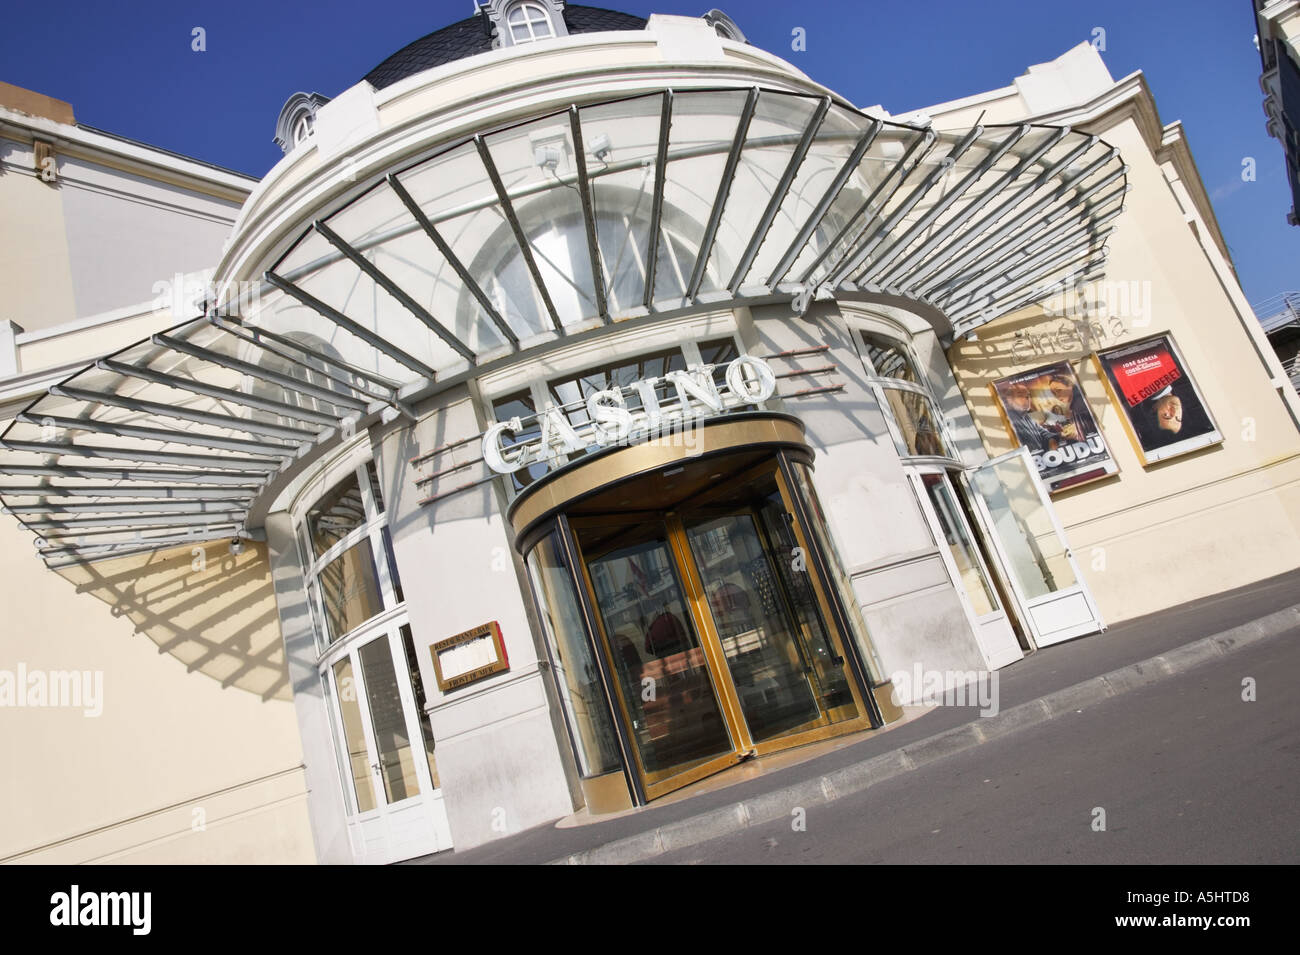 Casino at Cabourg, Normandy, France Stock Photo